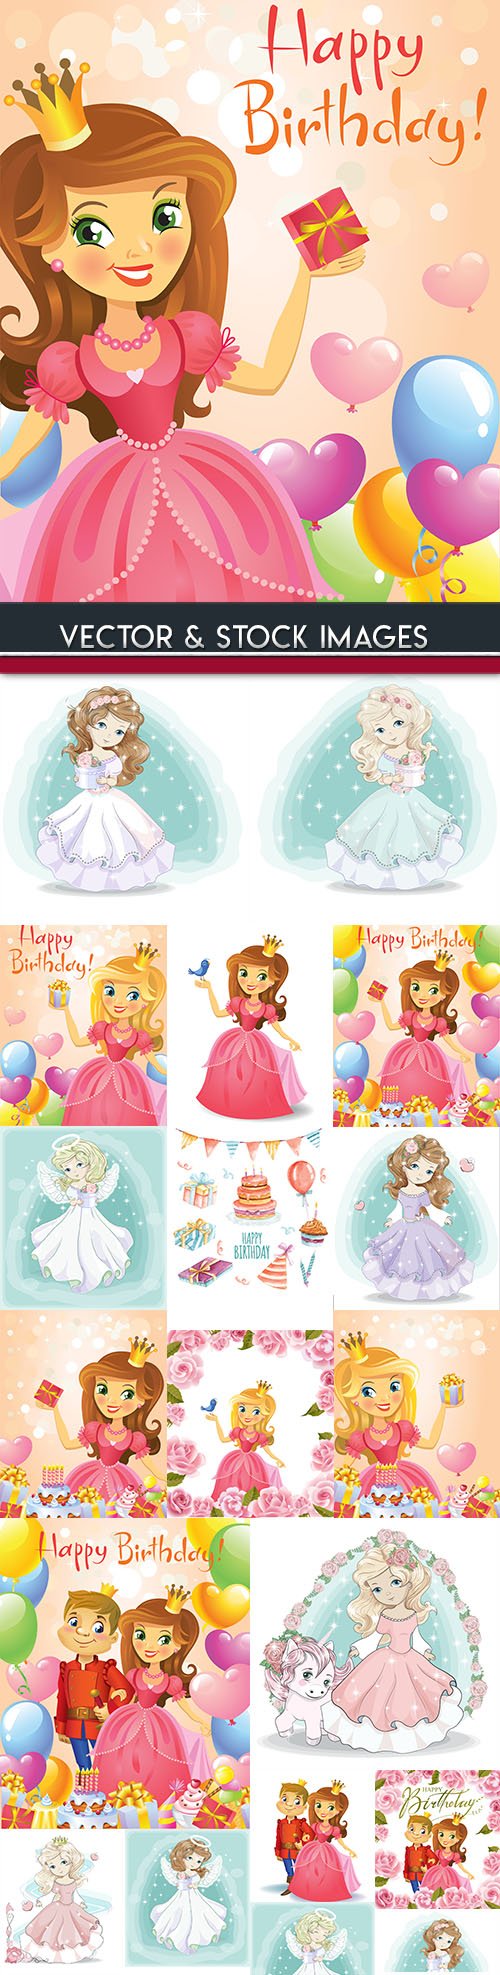 Fabulous princess with flowers for birthday illustration